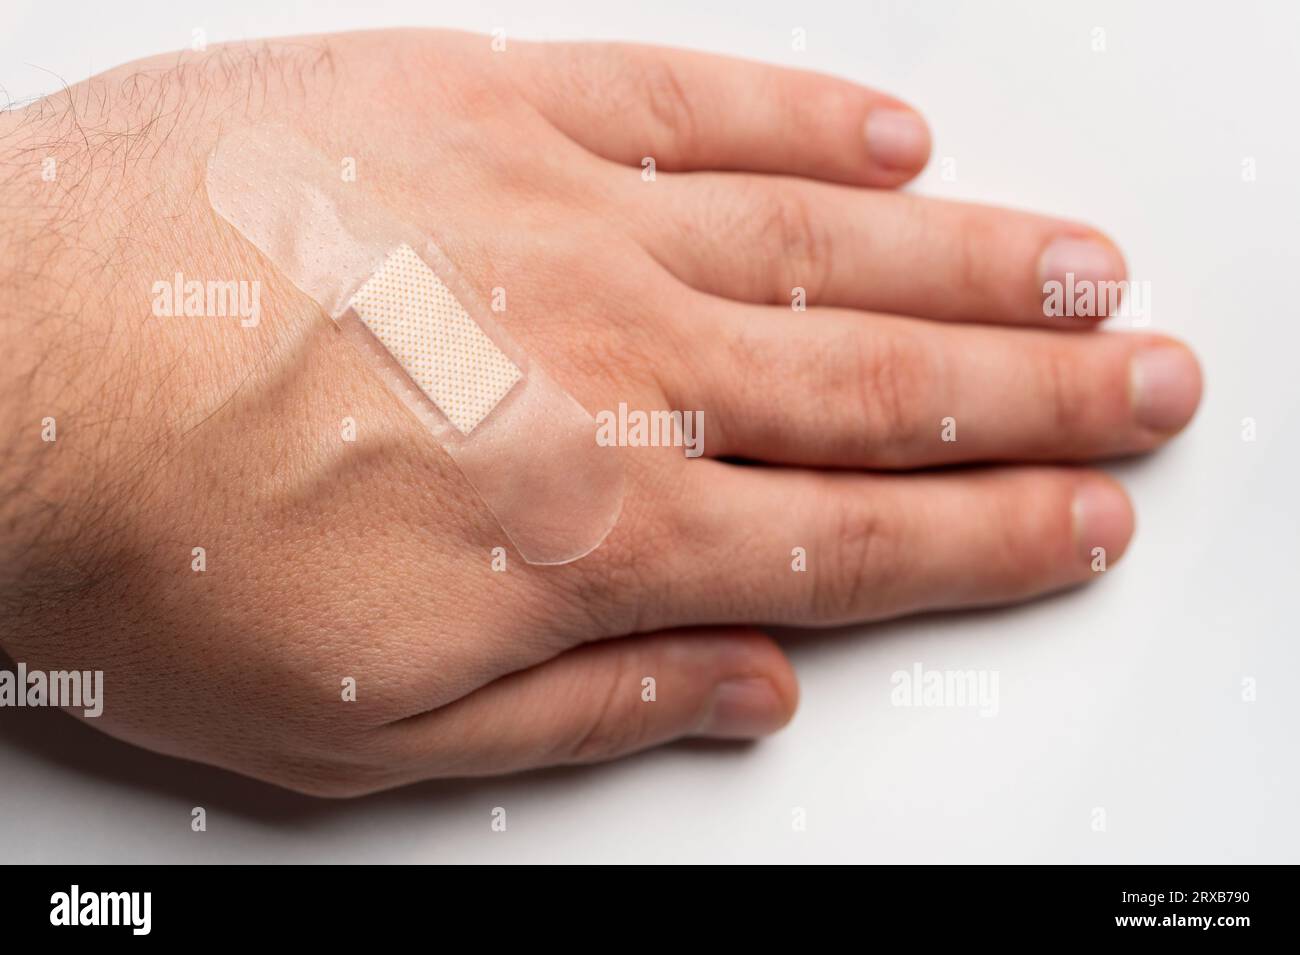 Aid tape on human skin hand isolated on studio background Stock Photo